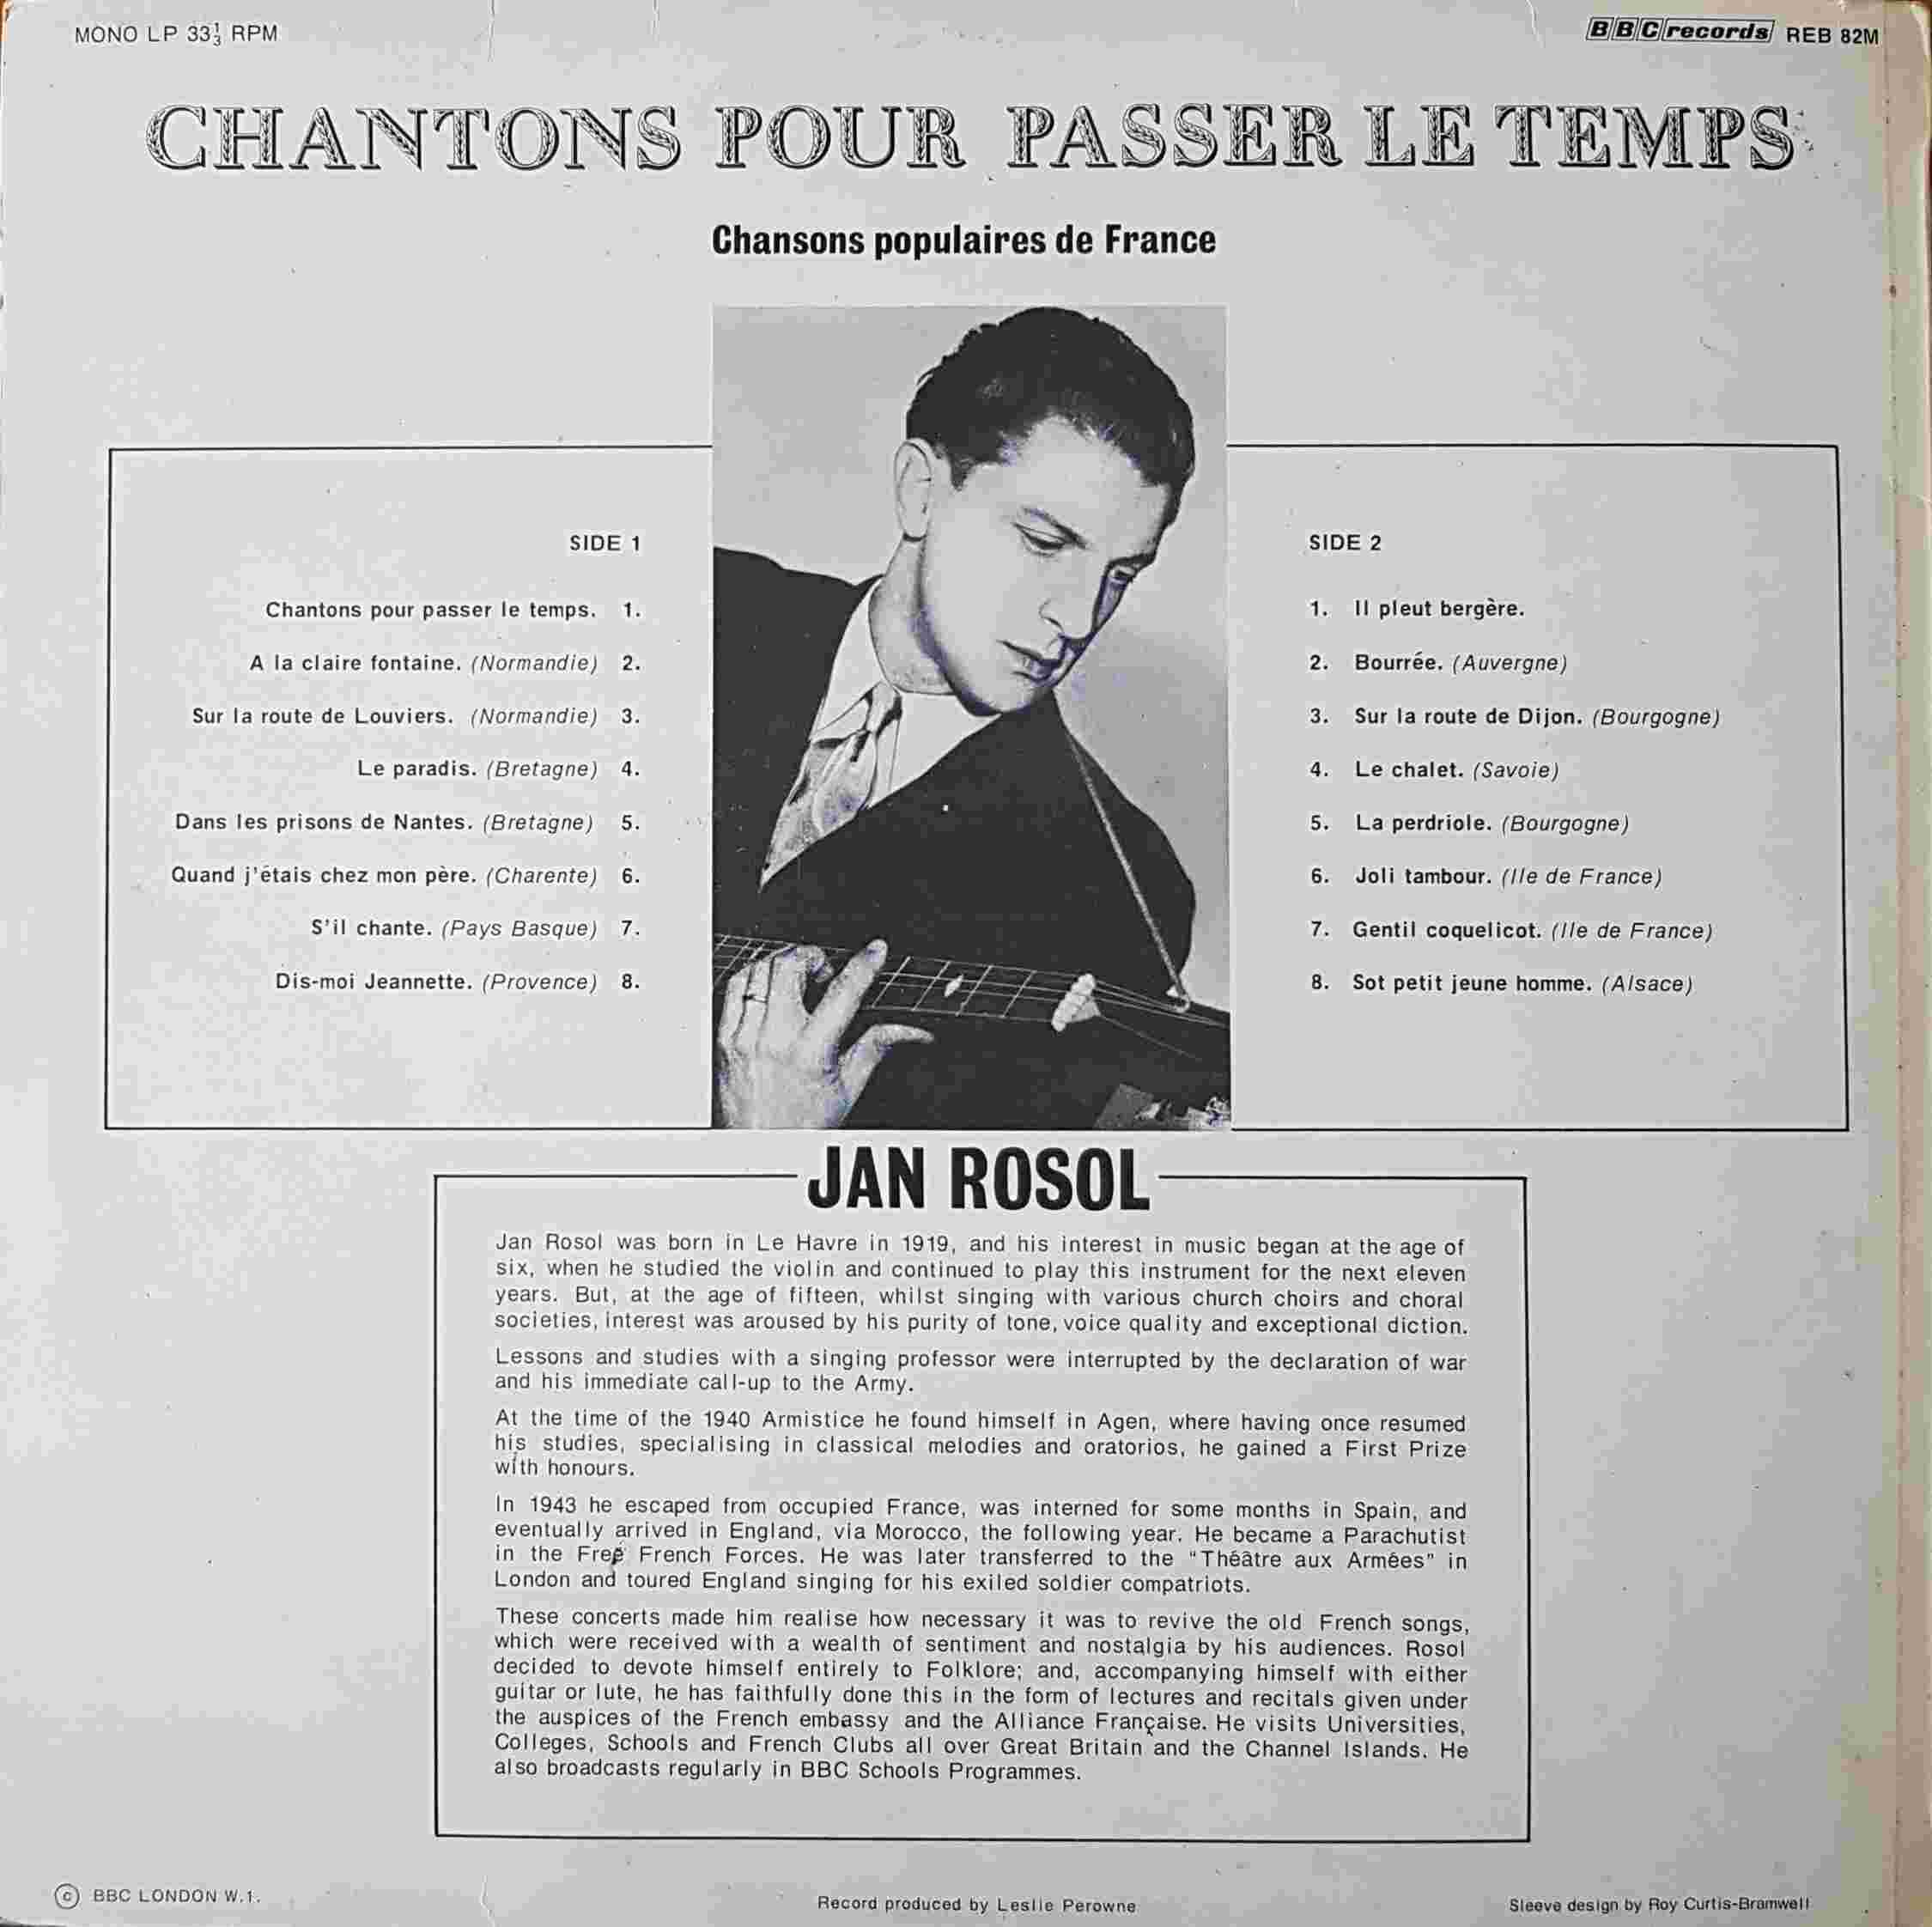 Picture of REB 82 Chantons Pour Passer Le Temps by artist Various from the BBC records and Tapes library